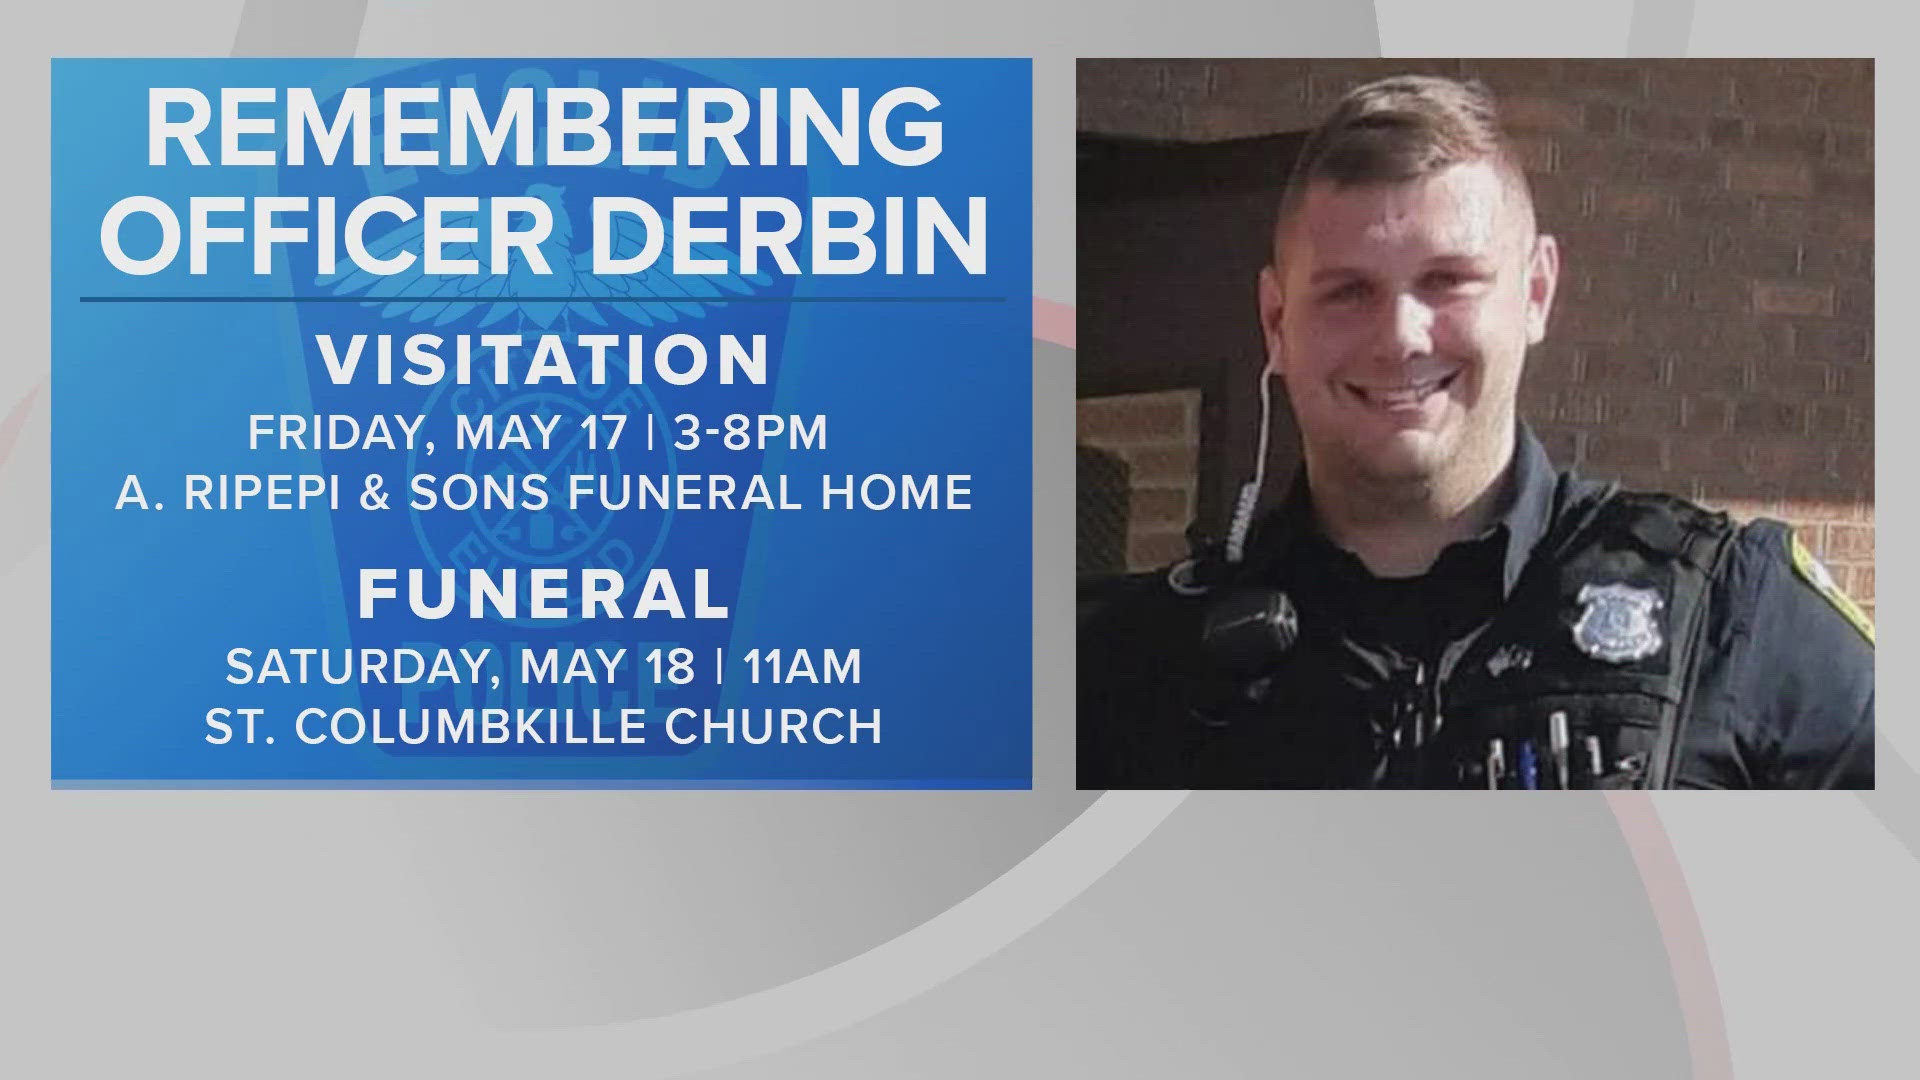 The funeral service will be held on Saturday, May 18, at St. Columbkille Church in Parma.